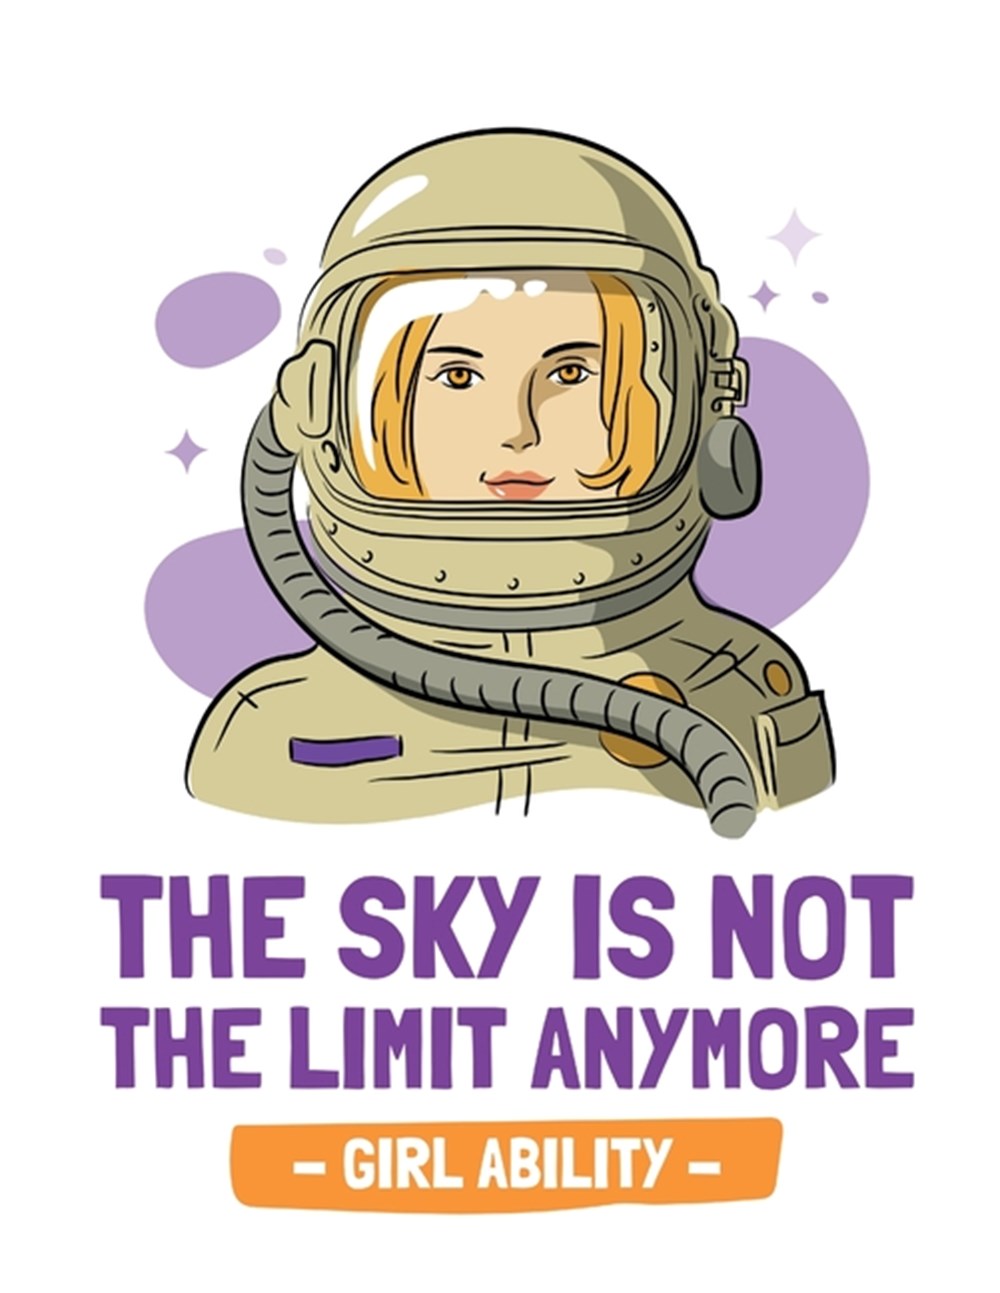 Sky Is Not The Limit Anymore Girl Ability: Time Management Journal Agenda Daily Goal Setting Weekly 